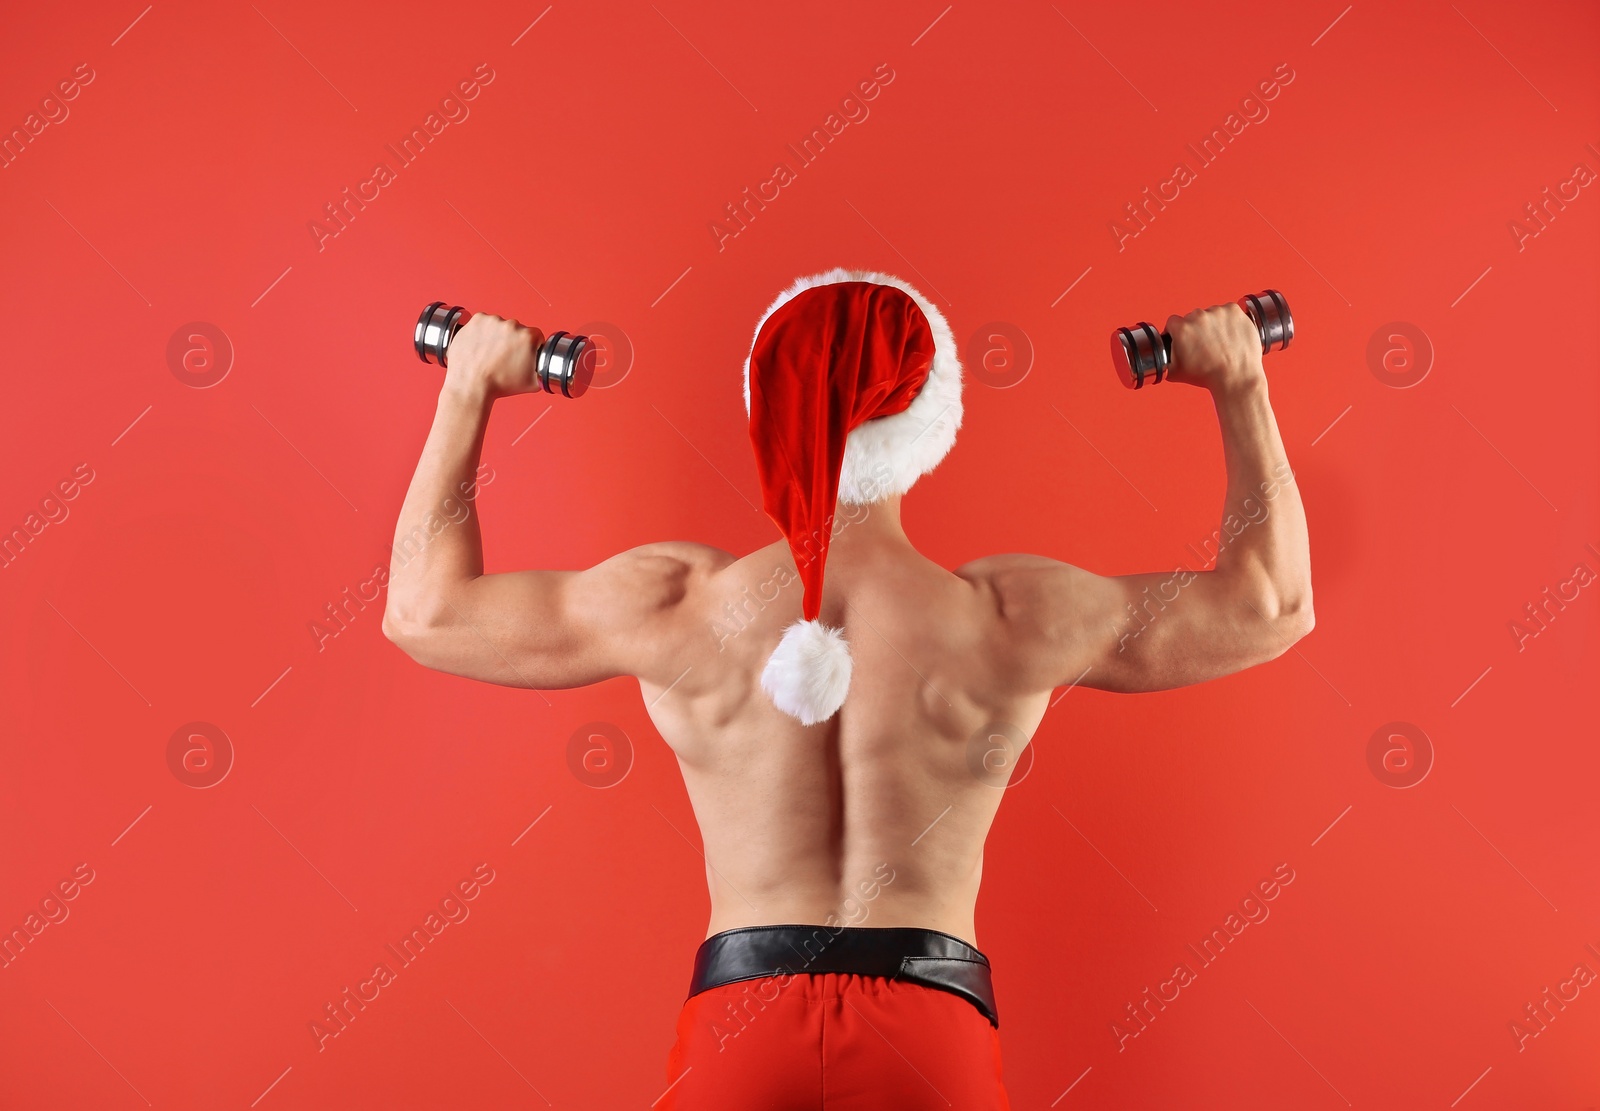 Photo of Young muscular man in Santa hat with dumbbells on color background